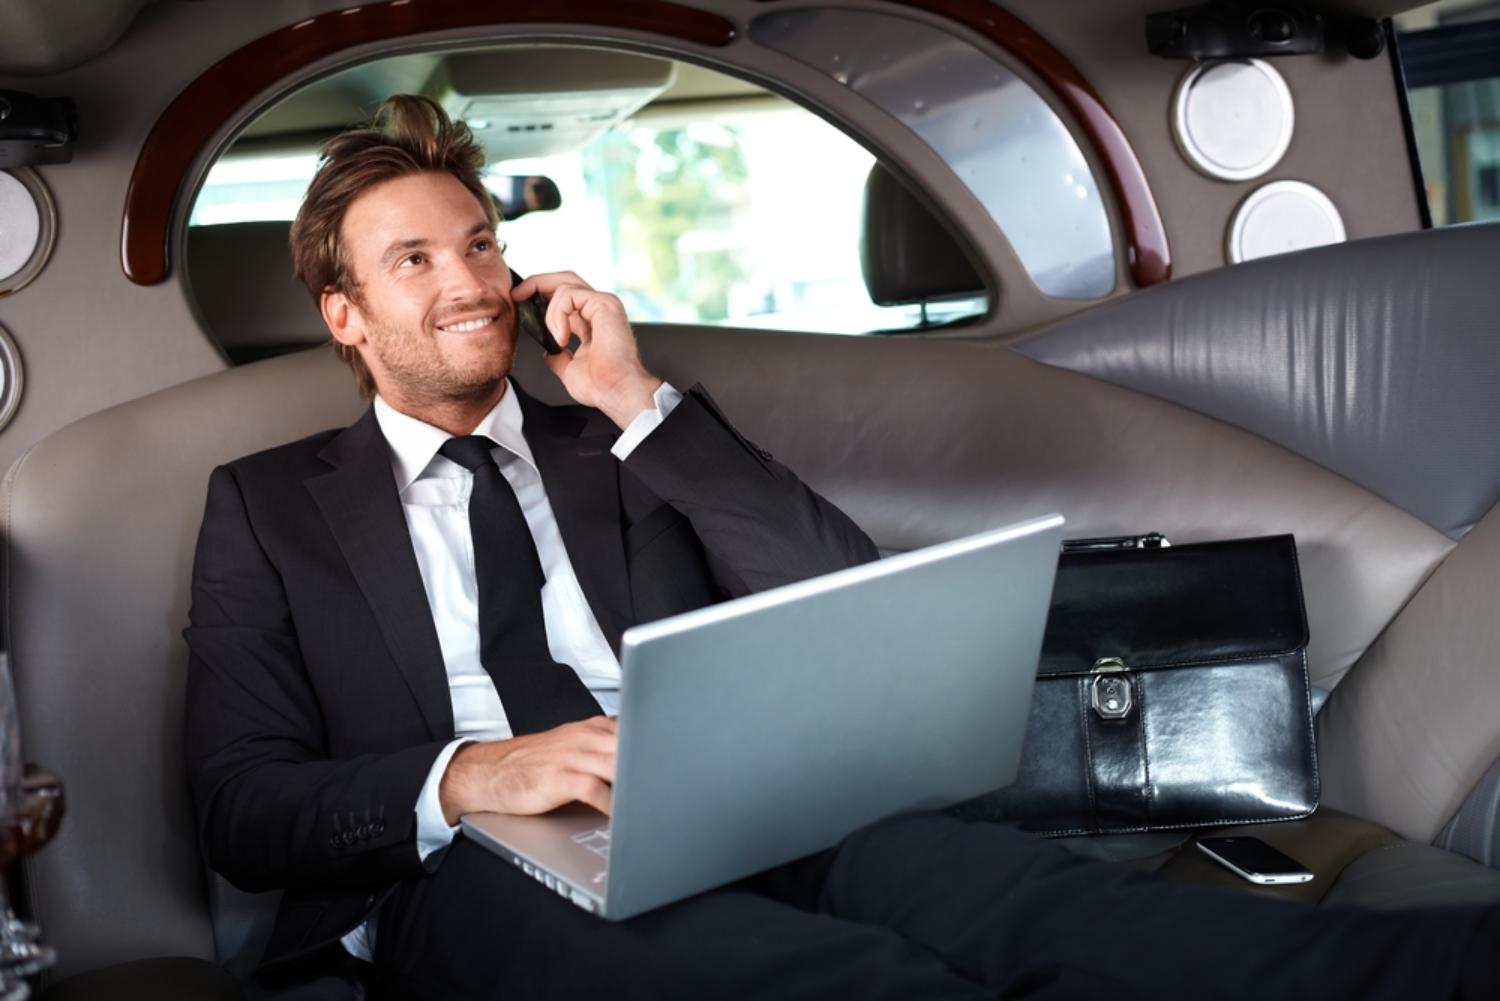 Limousine / Private Transfer from your hotel to Las Vegas Airport